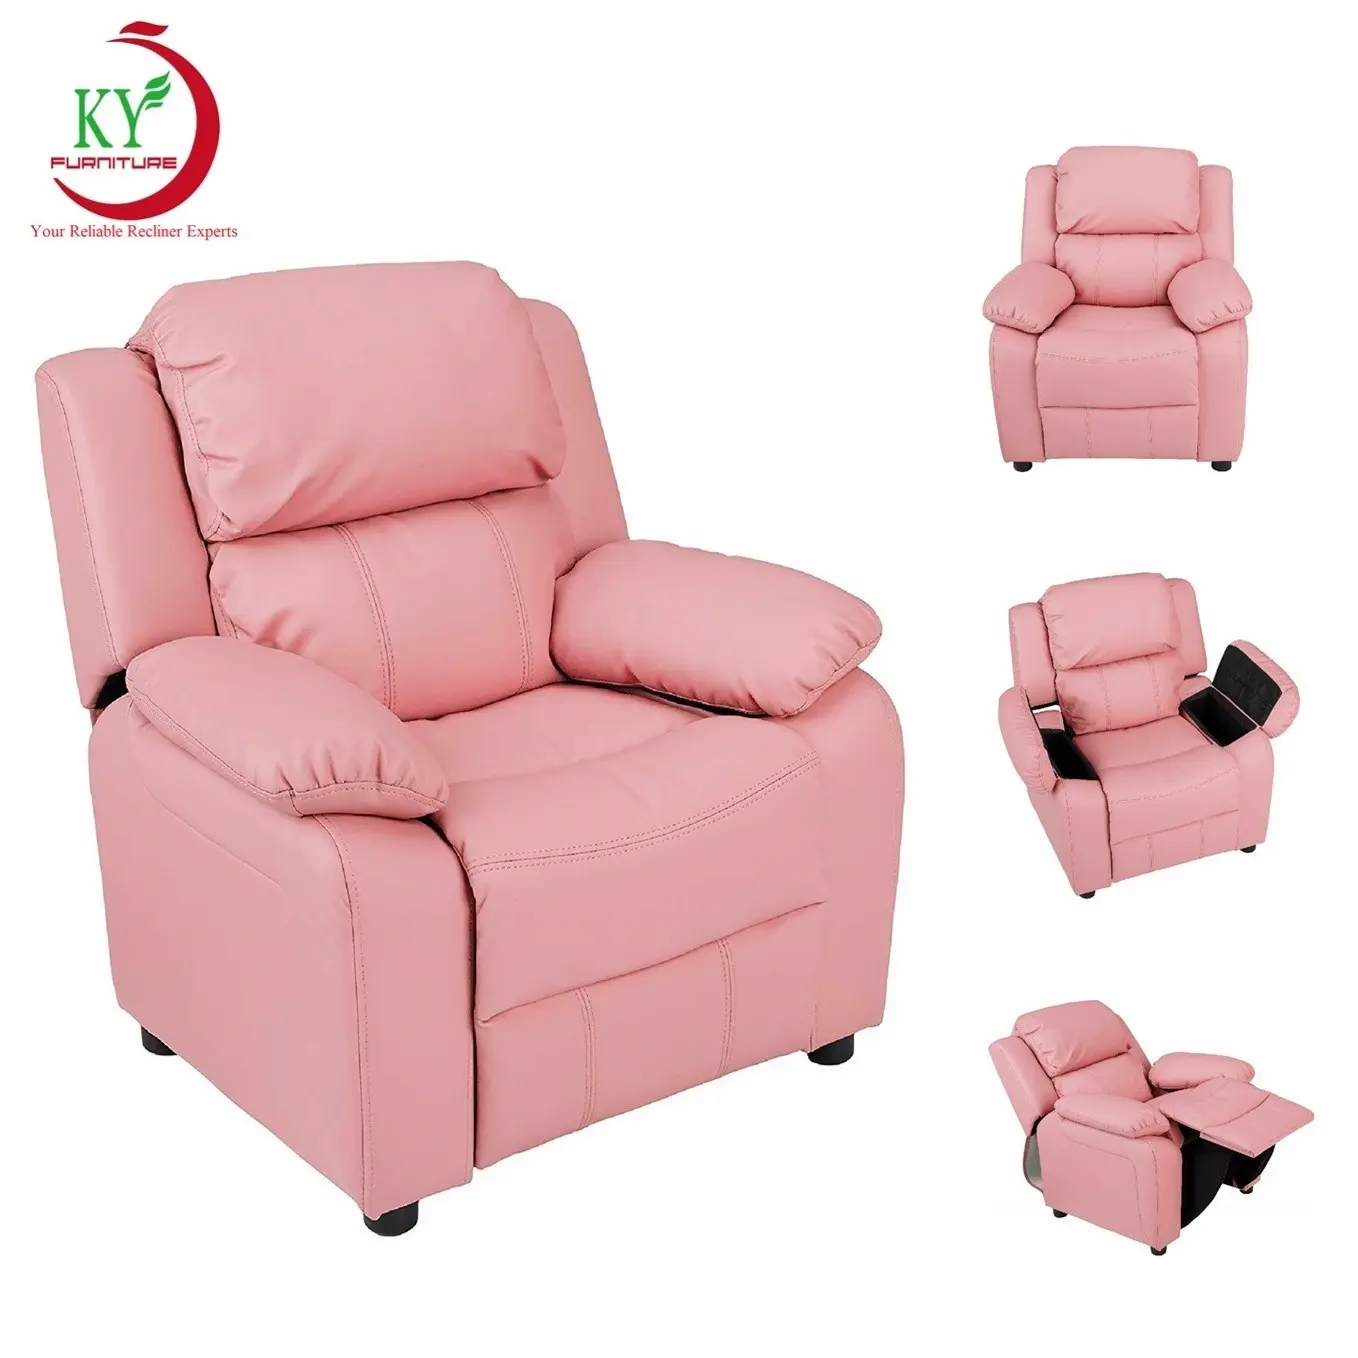 Kids Recliner Chair China Trade Buy China Direct From Kids Recliner Chair Factories At Alibaba Com